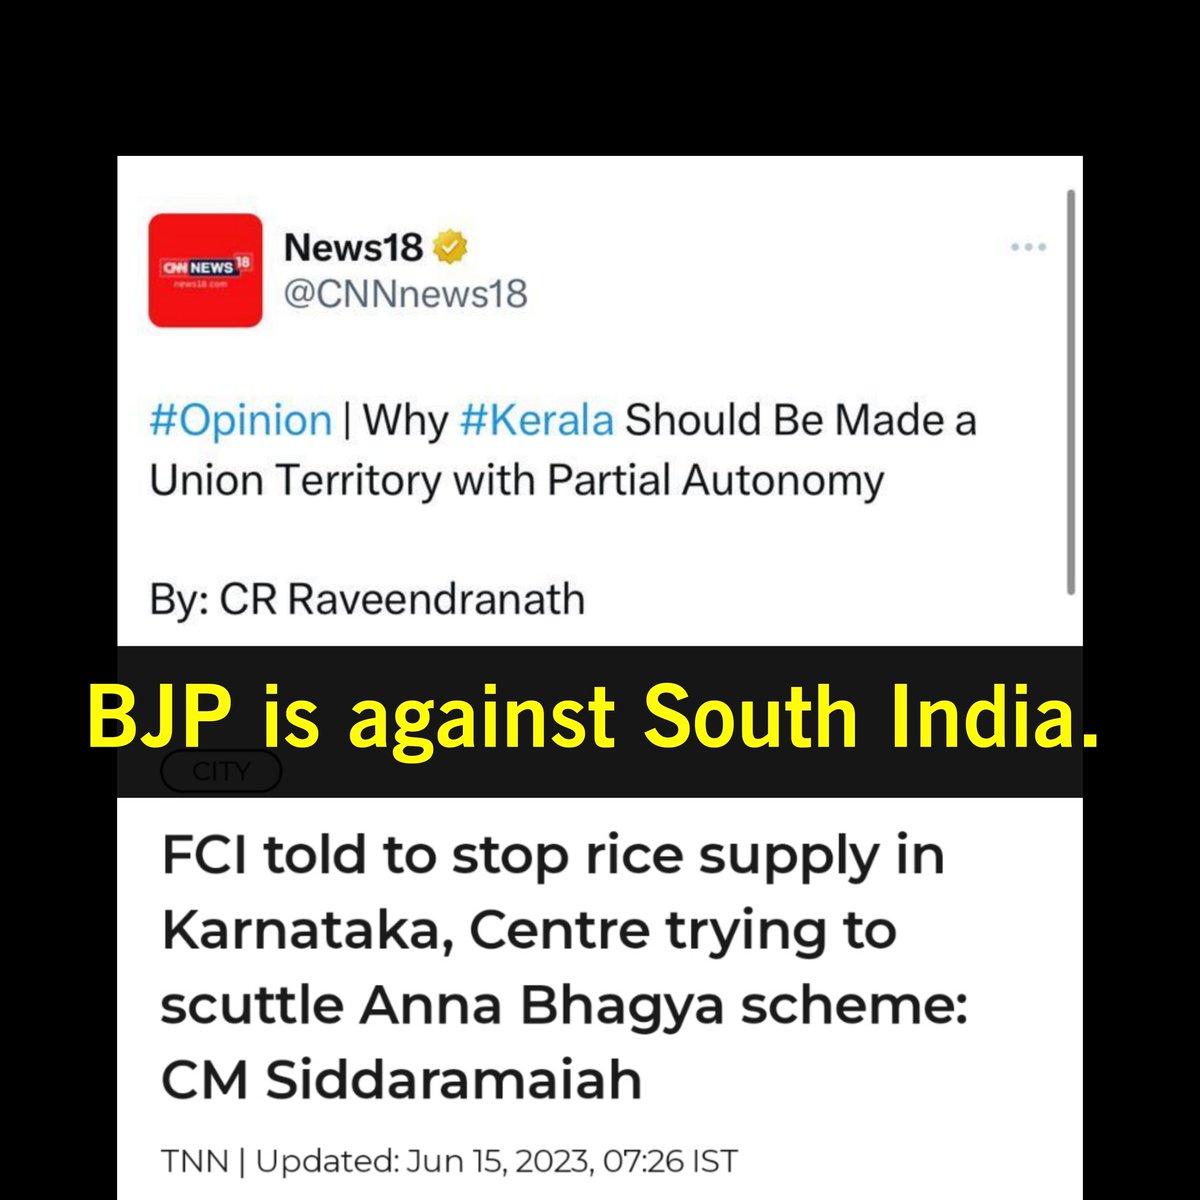 BJP can't win a single seat in Kerala & now they want to make Kerala an Union Territory.

BJP lost Karnataka & now they stopped Rice grain supply to Karnataka.